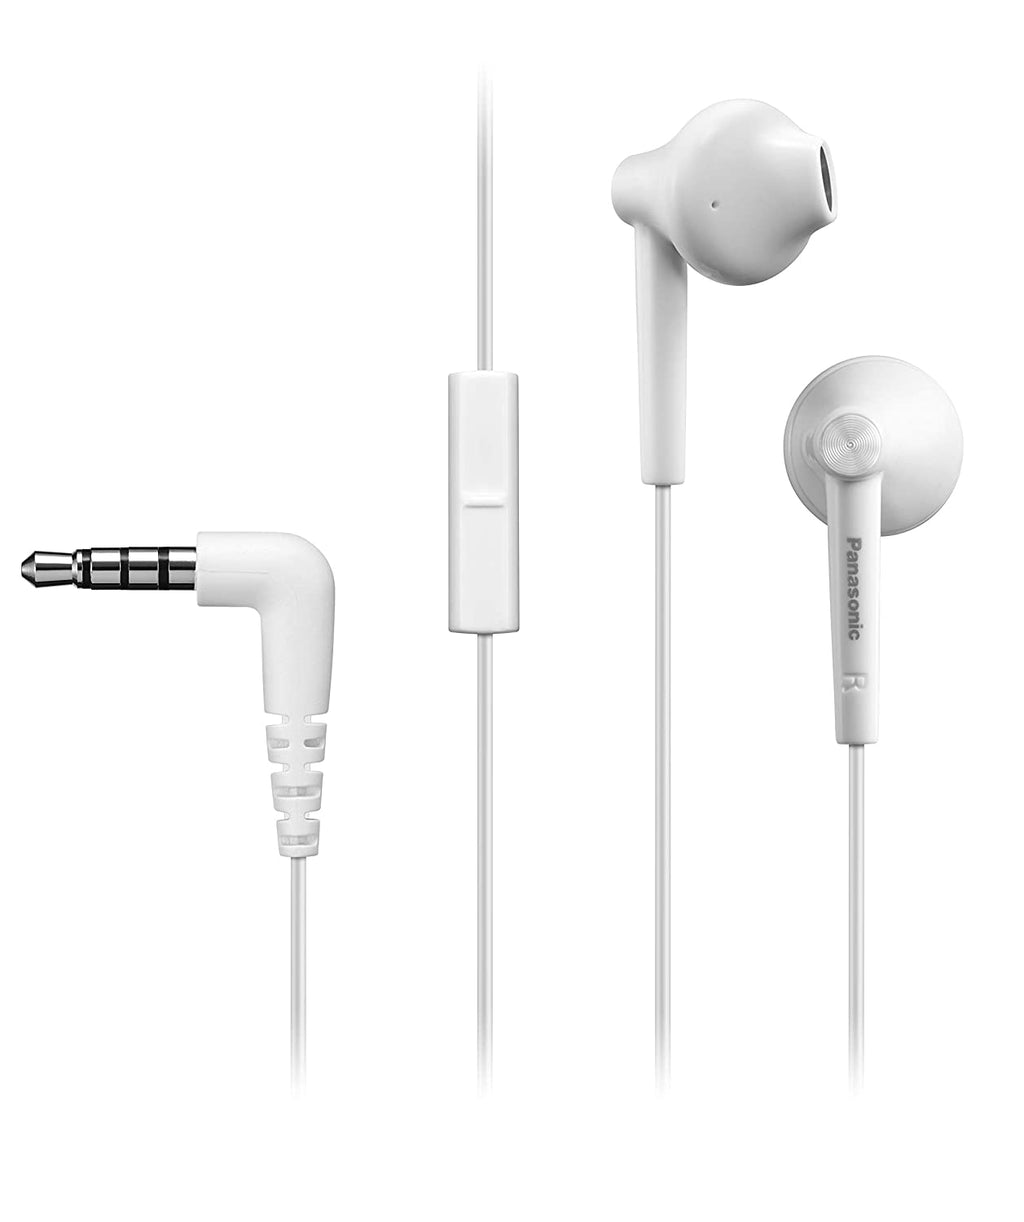 Panasonic Bass Boost Wired in Ear Earphone With Mic White Rp-tcm55e